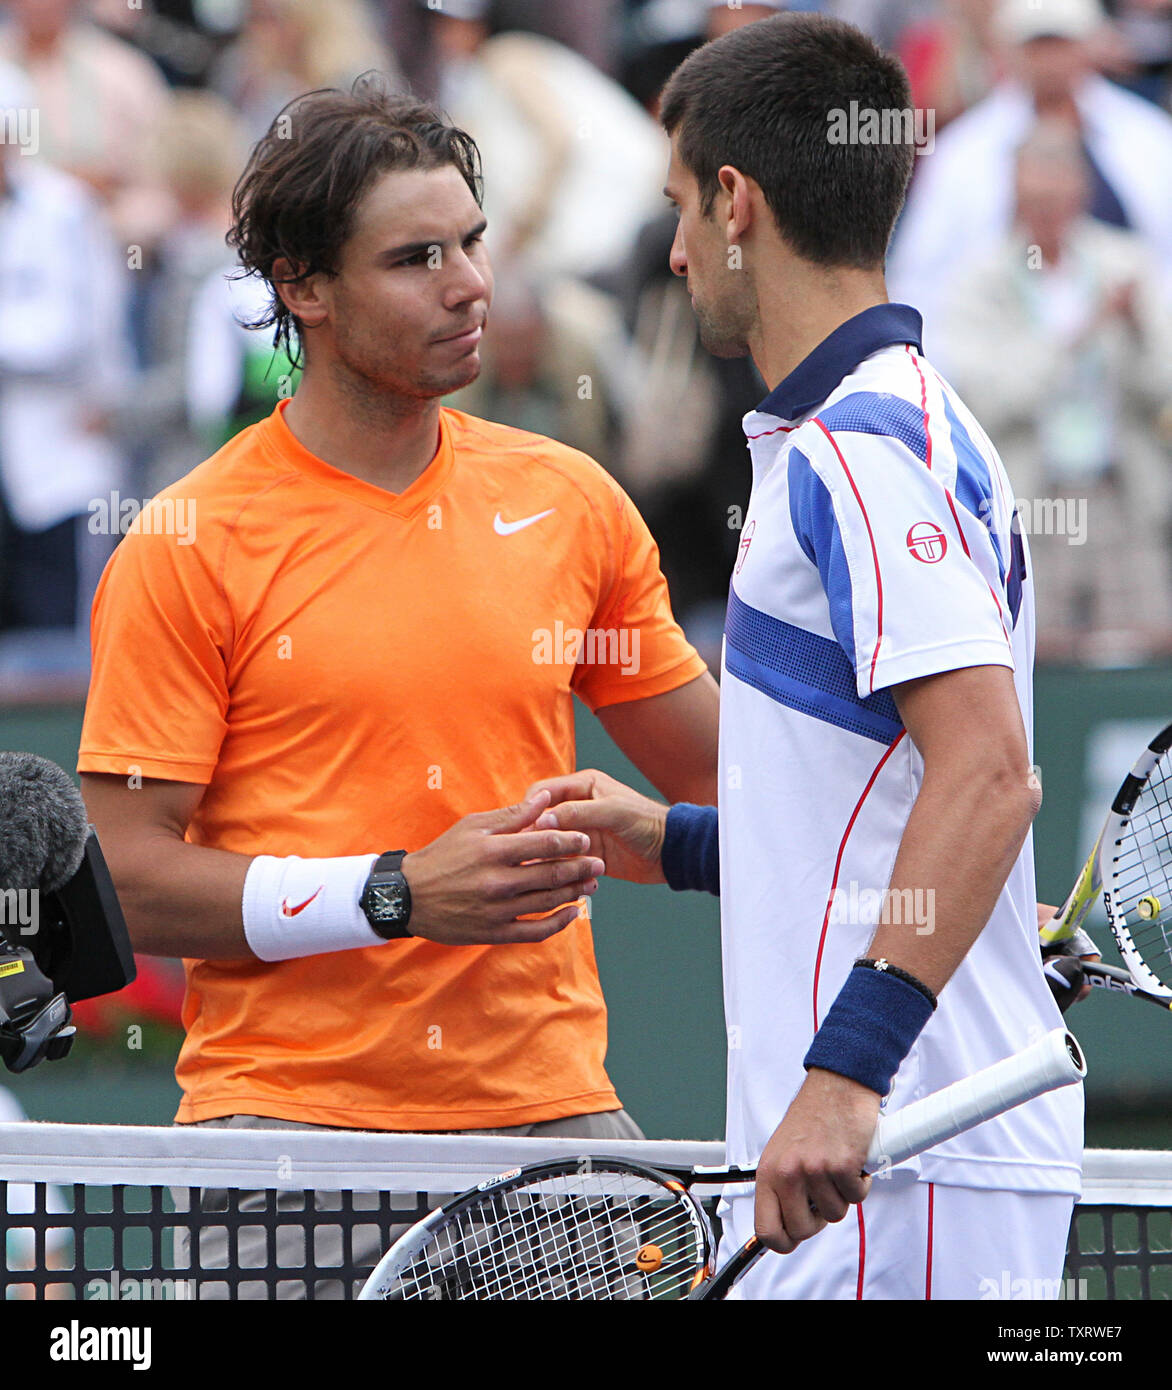 Spaniard Rafael Nadal (L) meets Serbian Novak Djokovic at the net after their mens final match at the BNP Paribas Open in Indian Wells, California on March 20, 2011.  Djokovic defeated Nadal 4-6, 6-3, 6-2 to win the tournament.   UPI/David Silpa Stock Photo